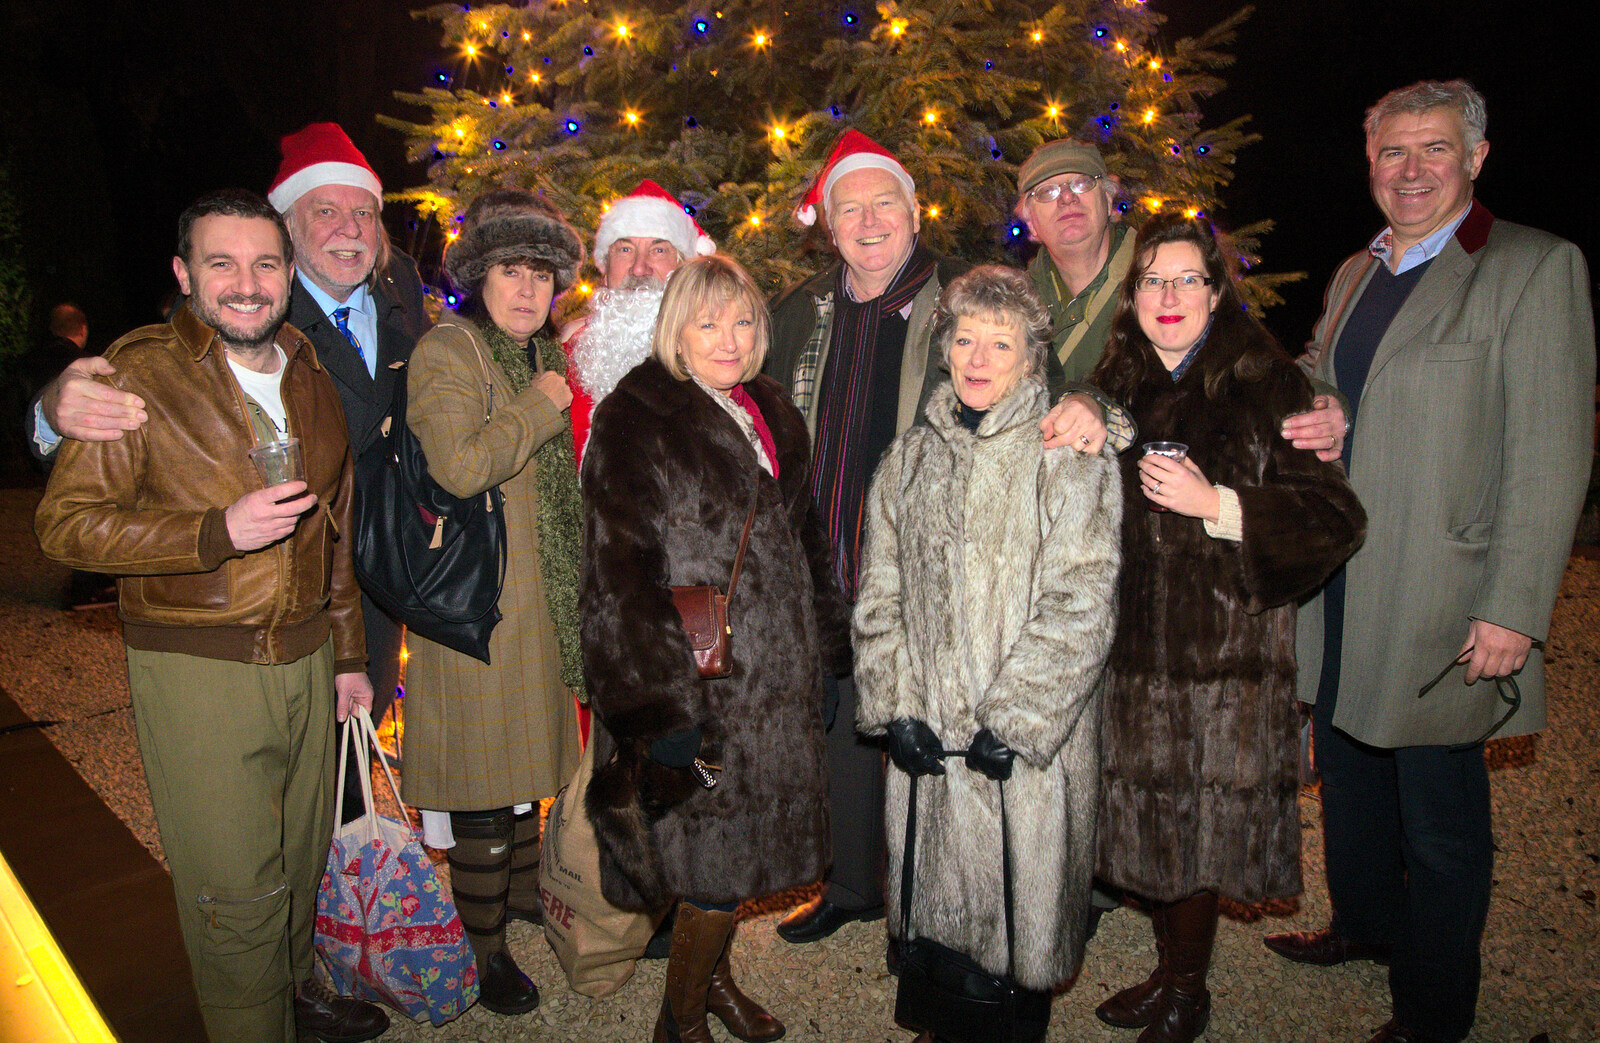 A final group photo from Rick Wakeman, Ian Lavender and the Christmas lights, The Oaksmere, Suffolk - 4th December 2014